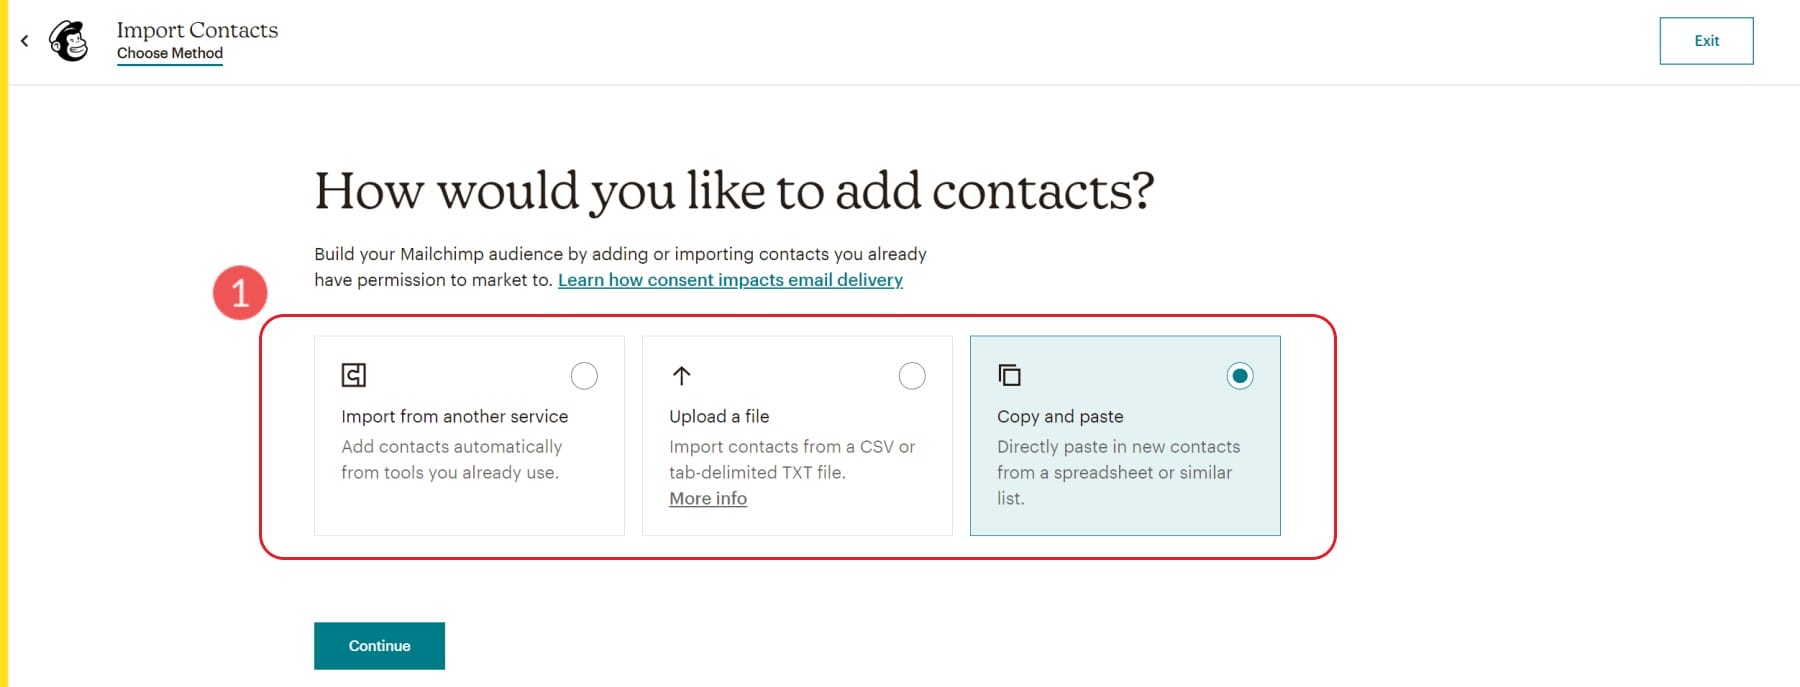 Step 2 - Choose Contact Import Method